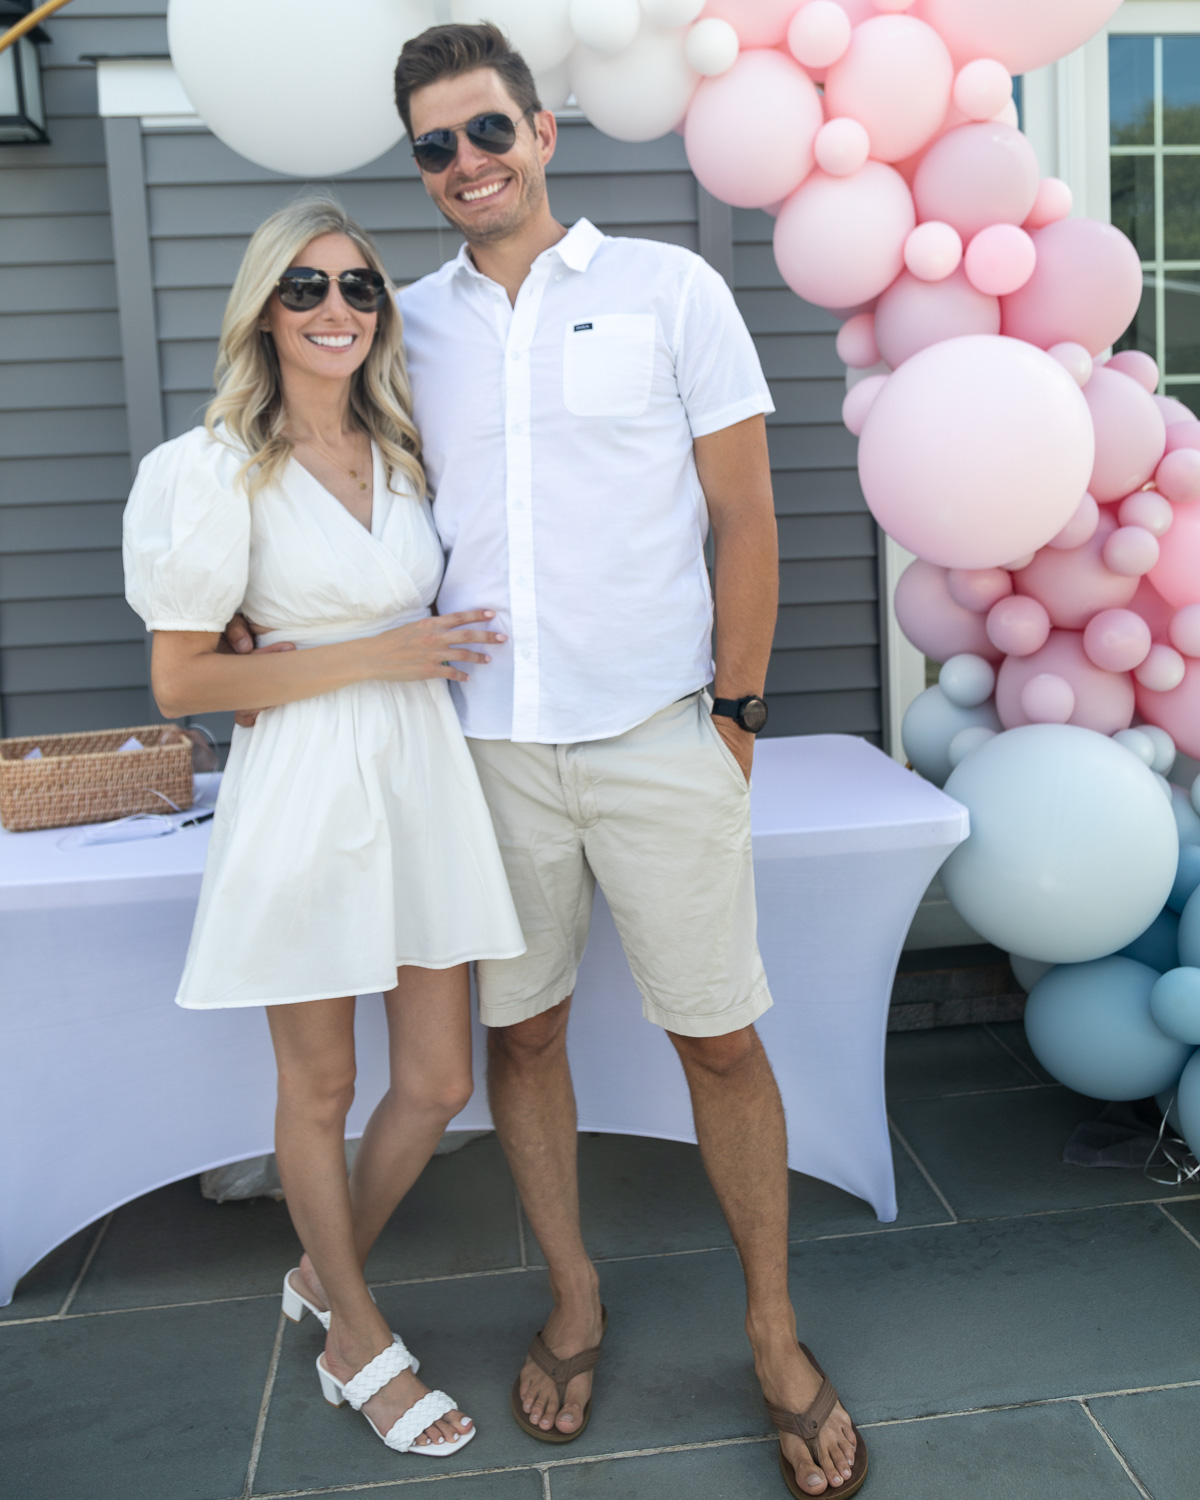 lawler-gender-reveal-party-neutral-couples-outfit-the-glamorous-gal-blog